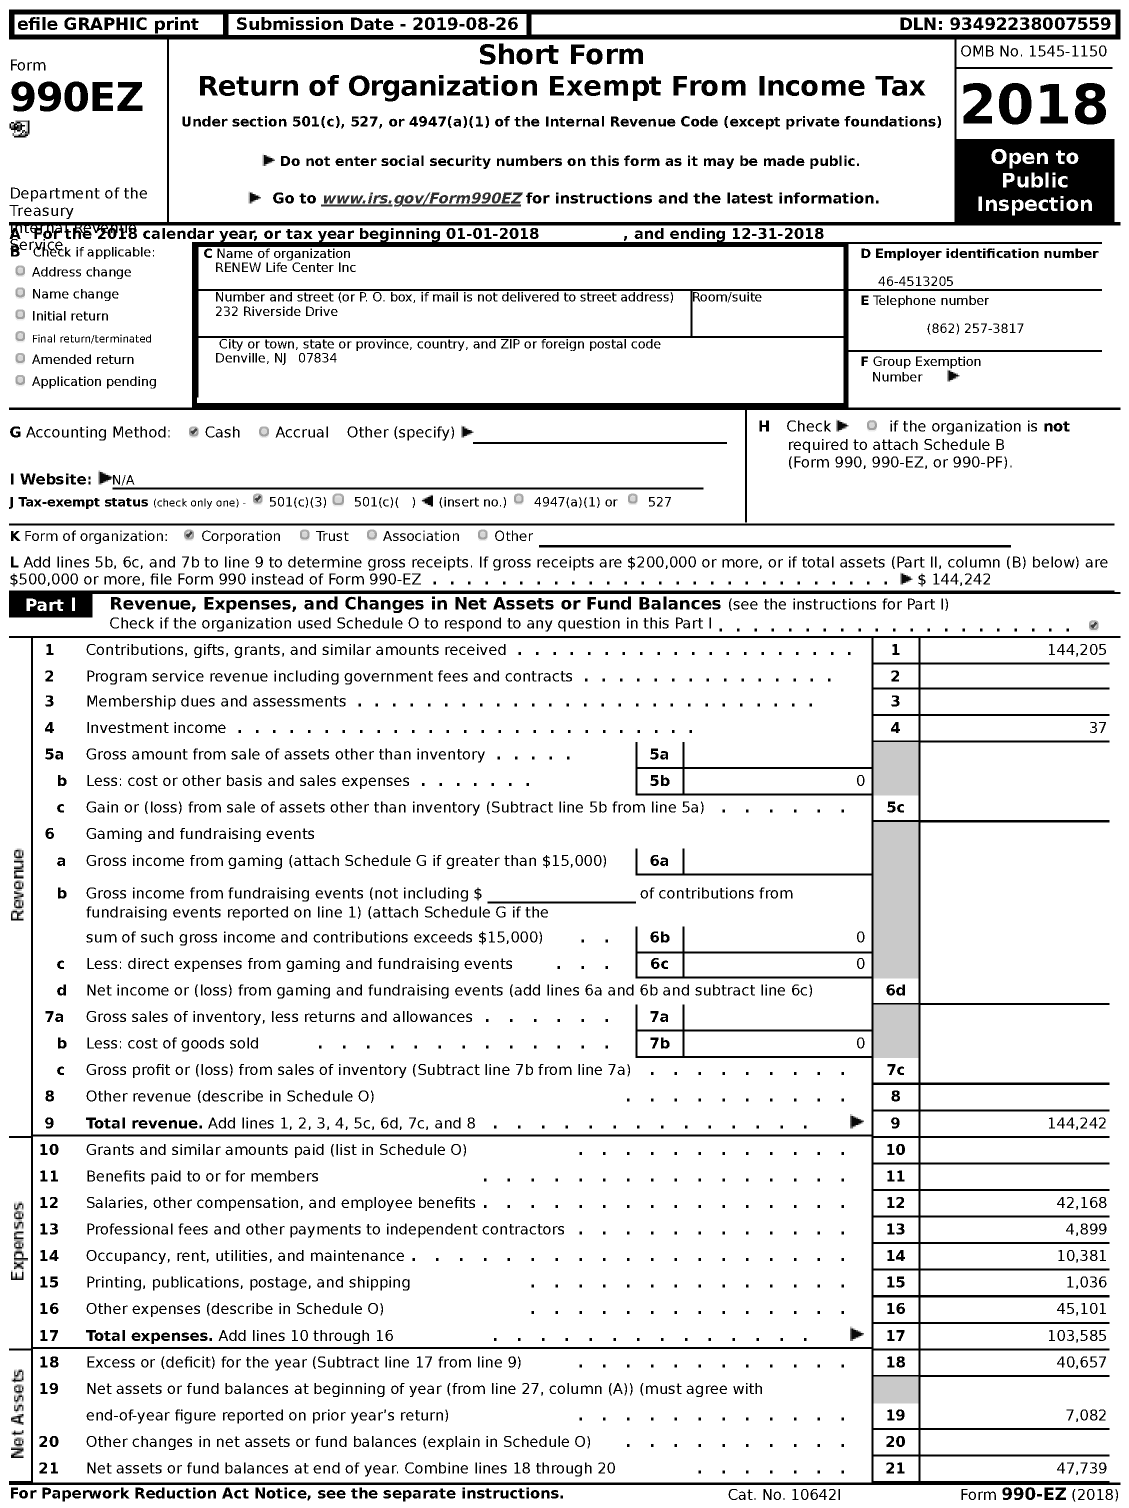 Image of first page of 2018 Form 990EZ for RENEW Life Center